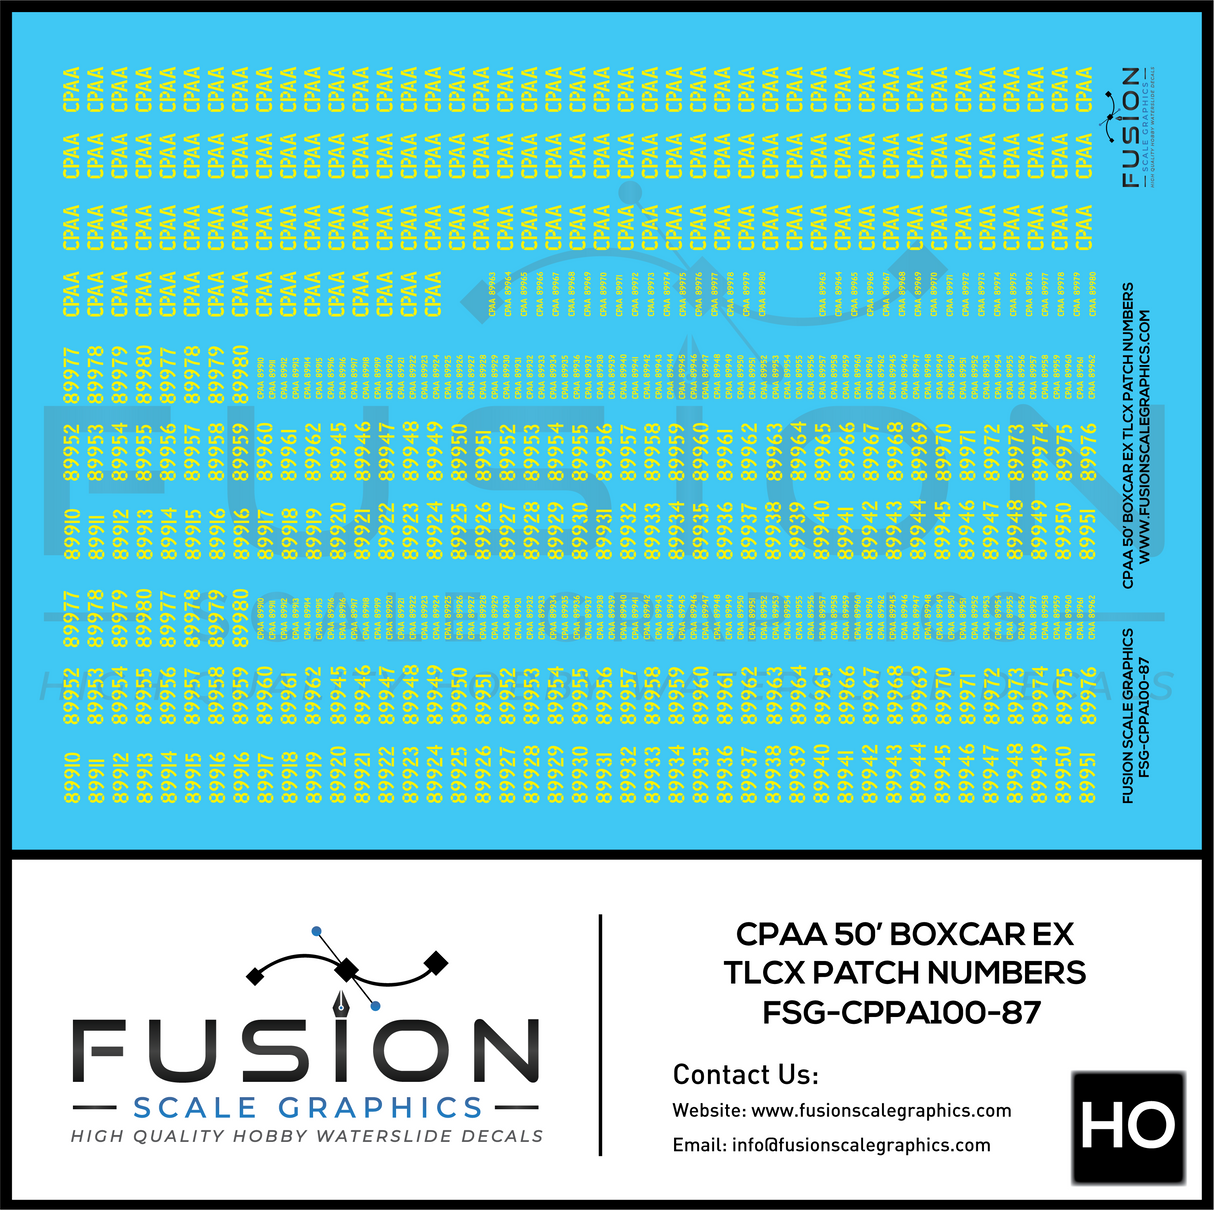 HO Scale CPAA 50' Boxcars ex TLCX Number Patching Decal Set